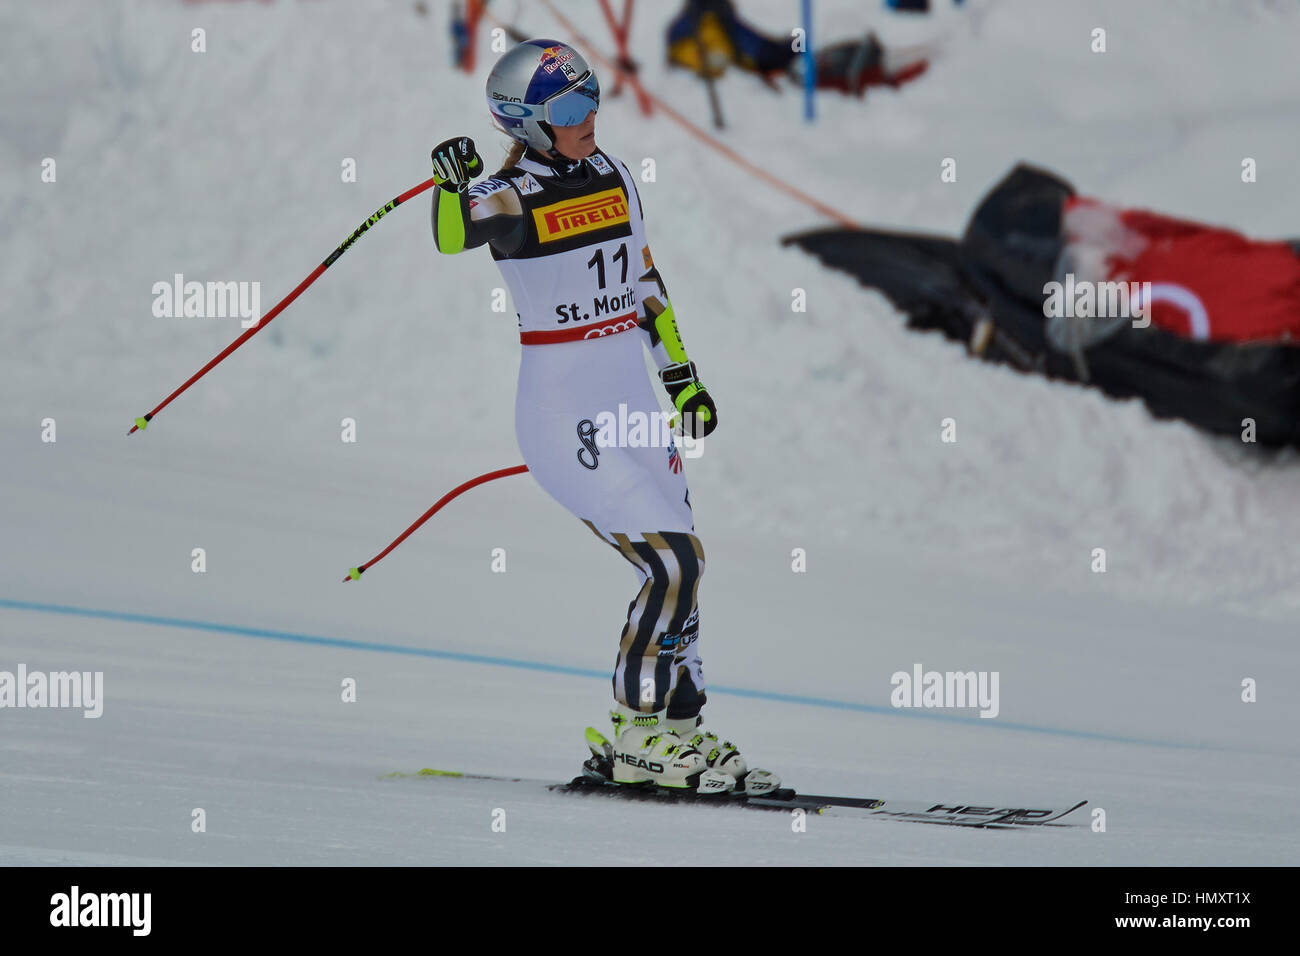 St. Moritz, Switzerland, 7th February 2017. Lindsey Vonn is disapointed after her DNF in the Ladies’ Super G at the FIS Alpine World Ski Championships 2017 in St. Moritz. Credit: Rolf Simeon/Alamy Live News Stock Photo